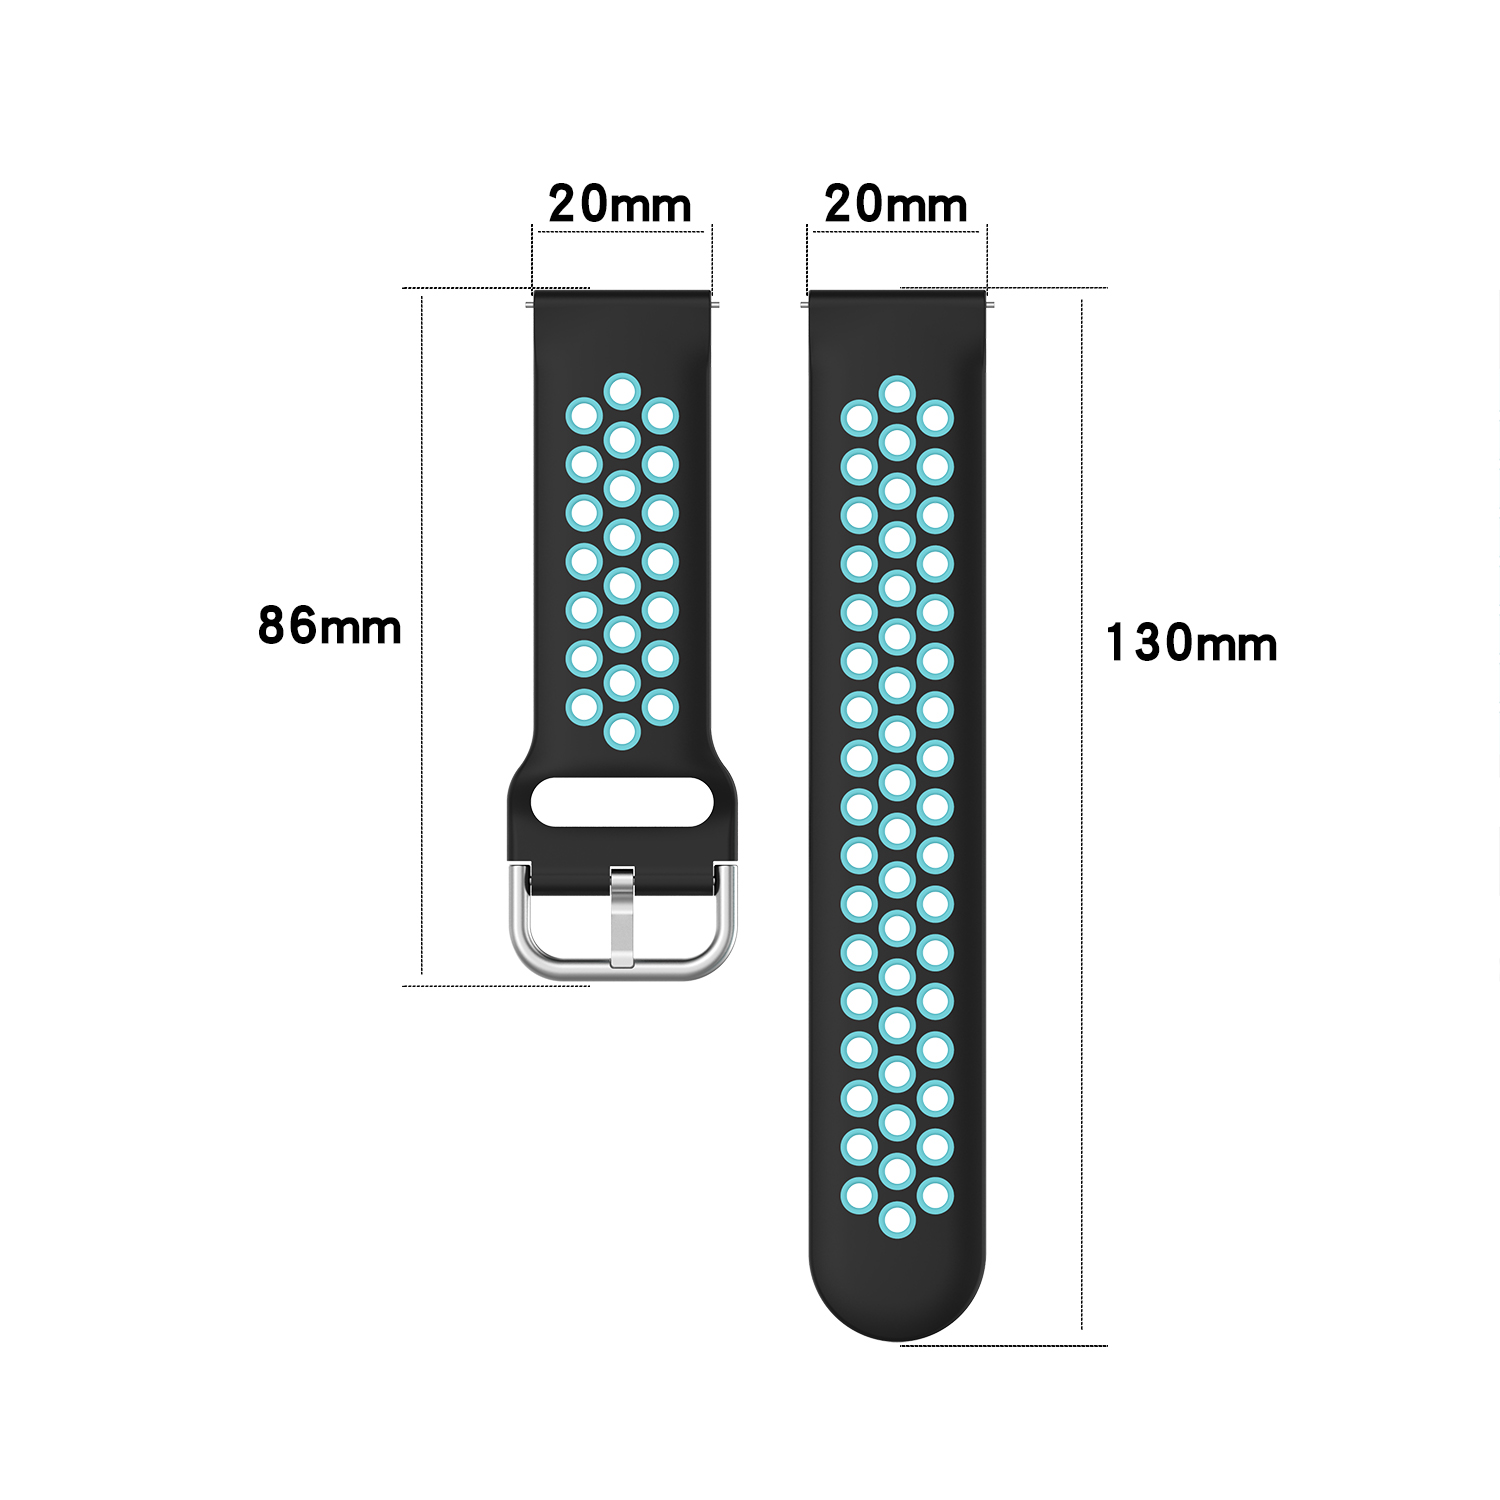 Bakeey-20MM-Silicone-Dual-Color-Stomata-Sports-Smart-Watch-Band-Replacement-Strap-For-Garmin-Vivoact-1697671-3